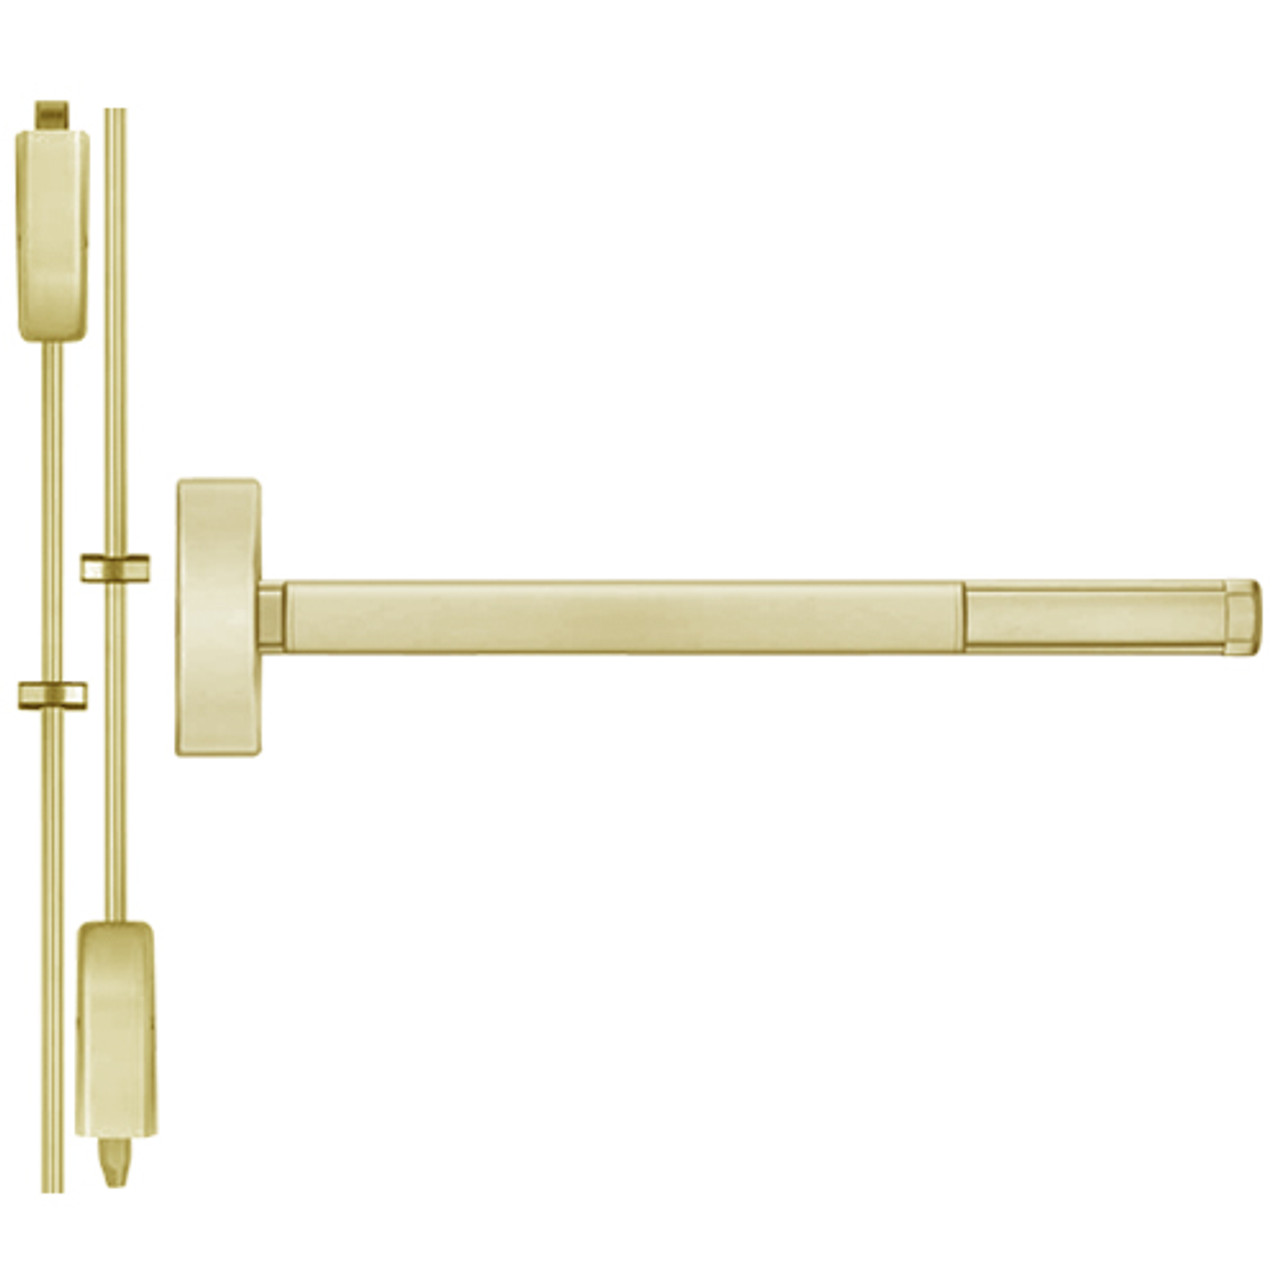 TSFL2201-606-48 PHI 2200 Series Apex Surface Vertical Rod Device with Touchbar Monitoring Switch Prepped for Cover Plate in Satin Brass Finish